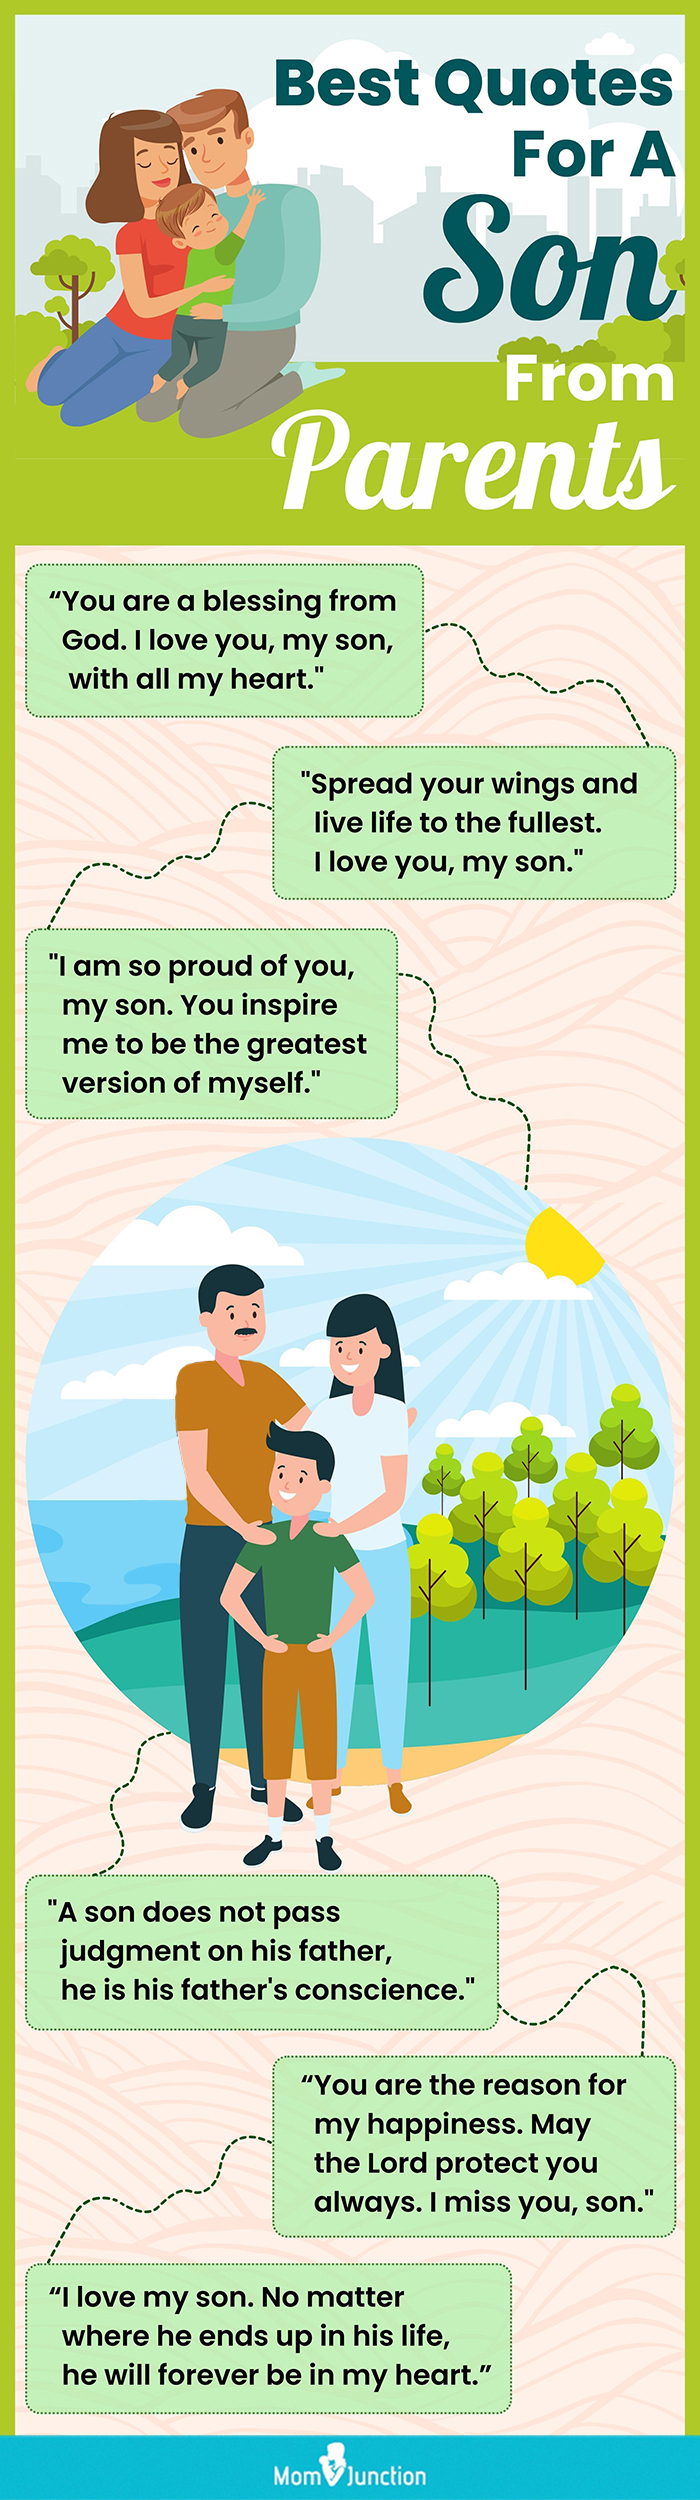 best quotes for a son from parents [infographic]